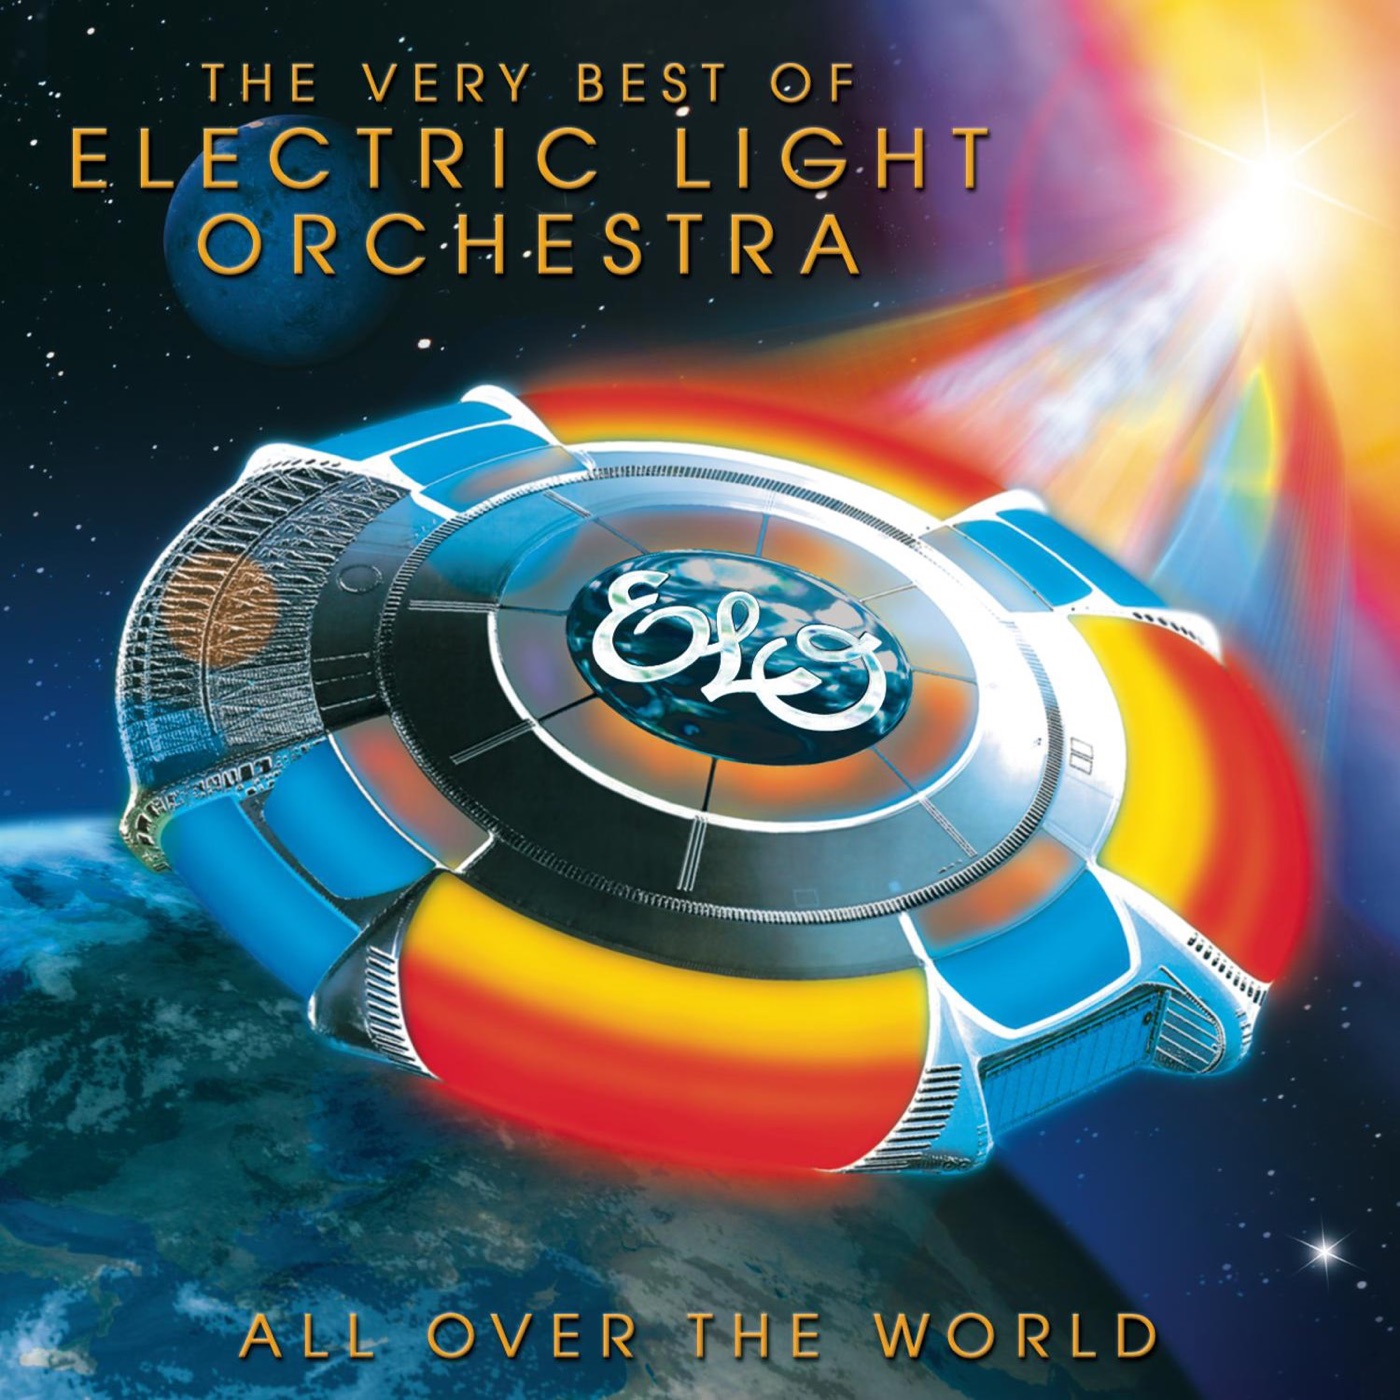 az_1405_All Over the World The Very Best of Electric Light Orchestra_Electric Light Orchestra